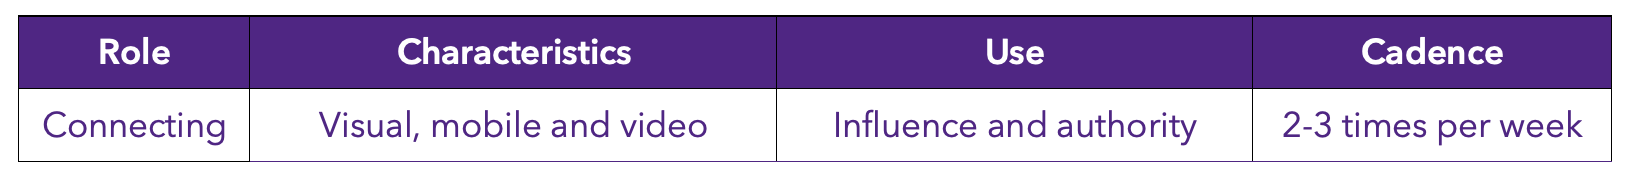 A table with the following info about Facebook: Role=Connecting, Characteristics = visual, mobile and video, Use = influence and authority and Cadence = 2-3 times per week